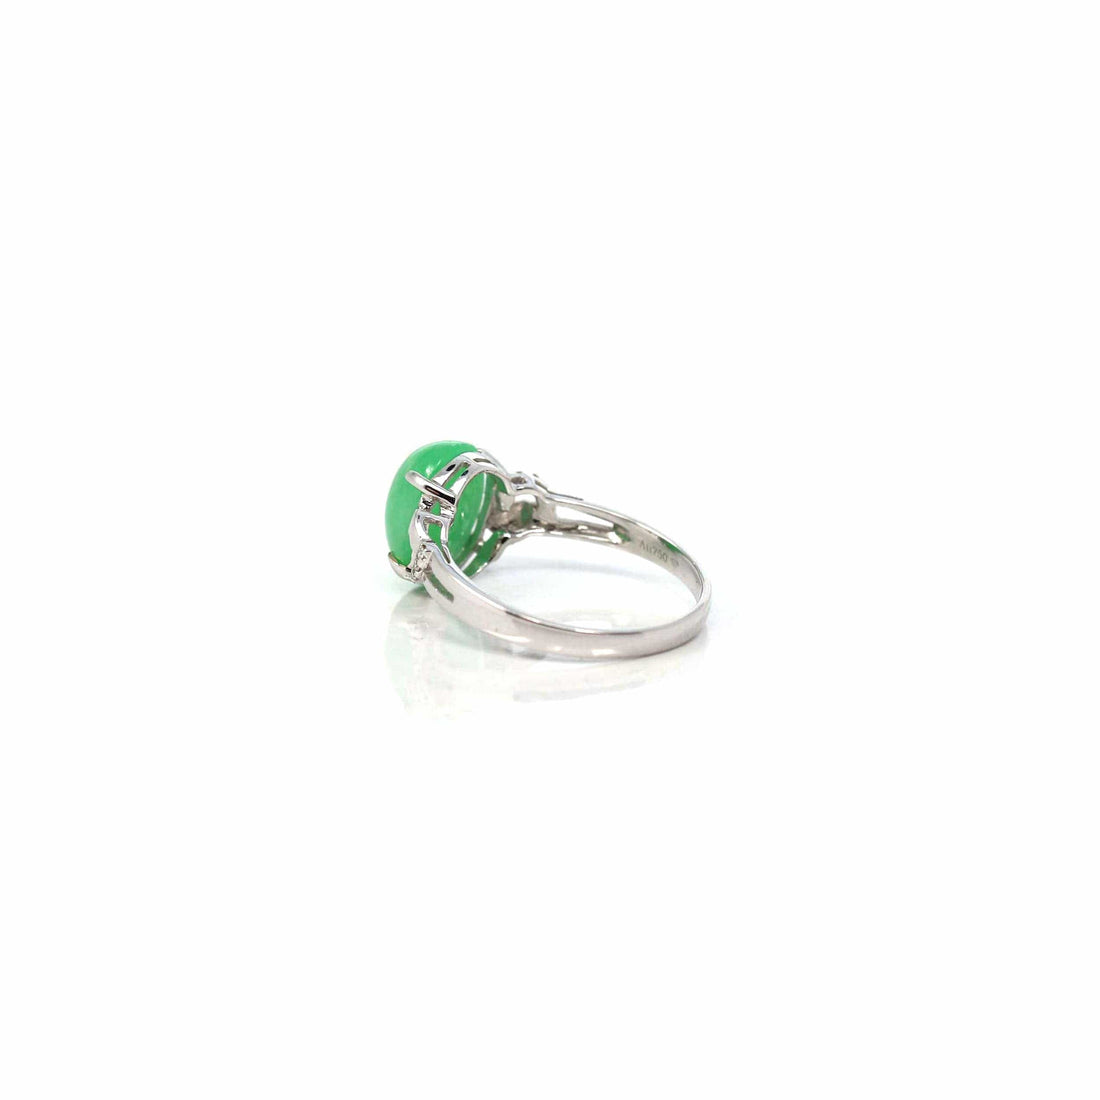 Baikalla Jewelry Jadeite Engagement Ring Copy of 18k White Gold Natural Imperial Green Jadeite Jade Engagement Ring With Diamonds